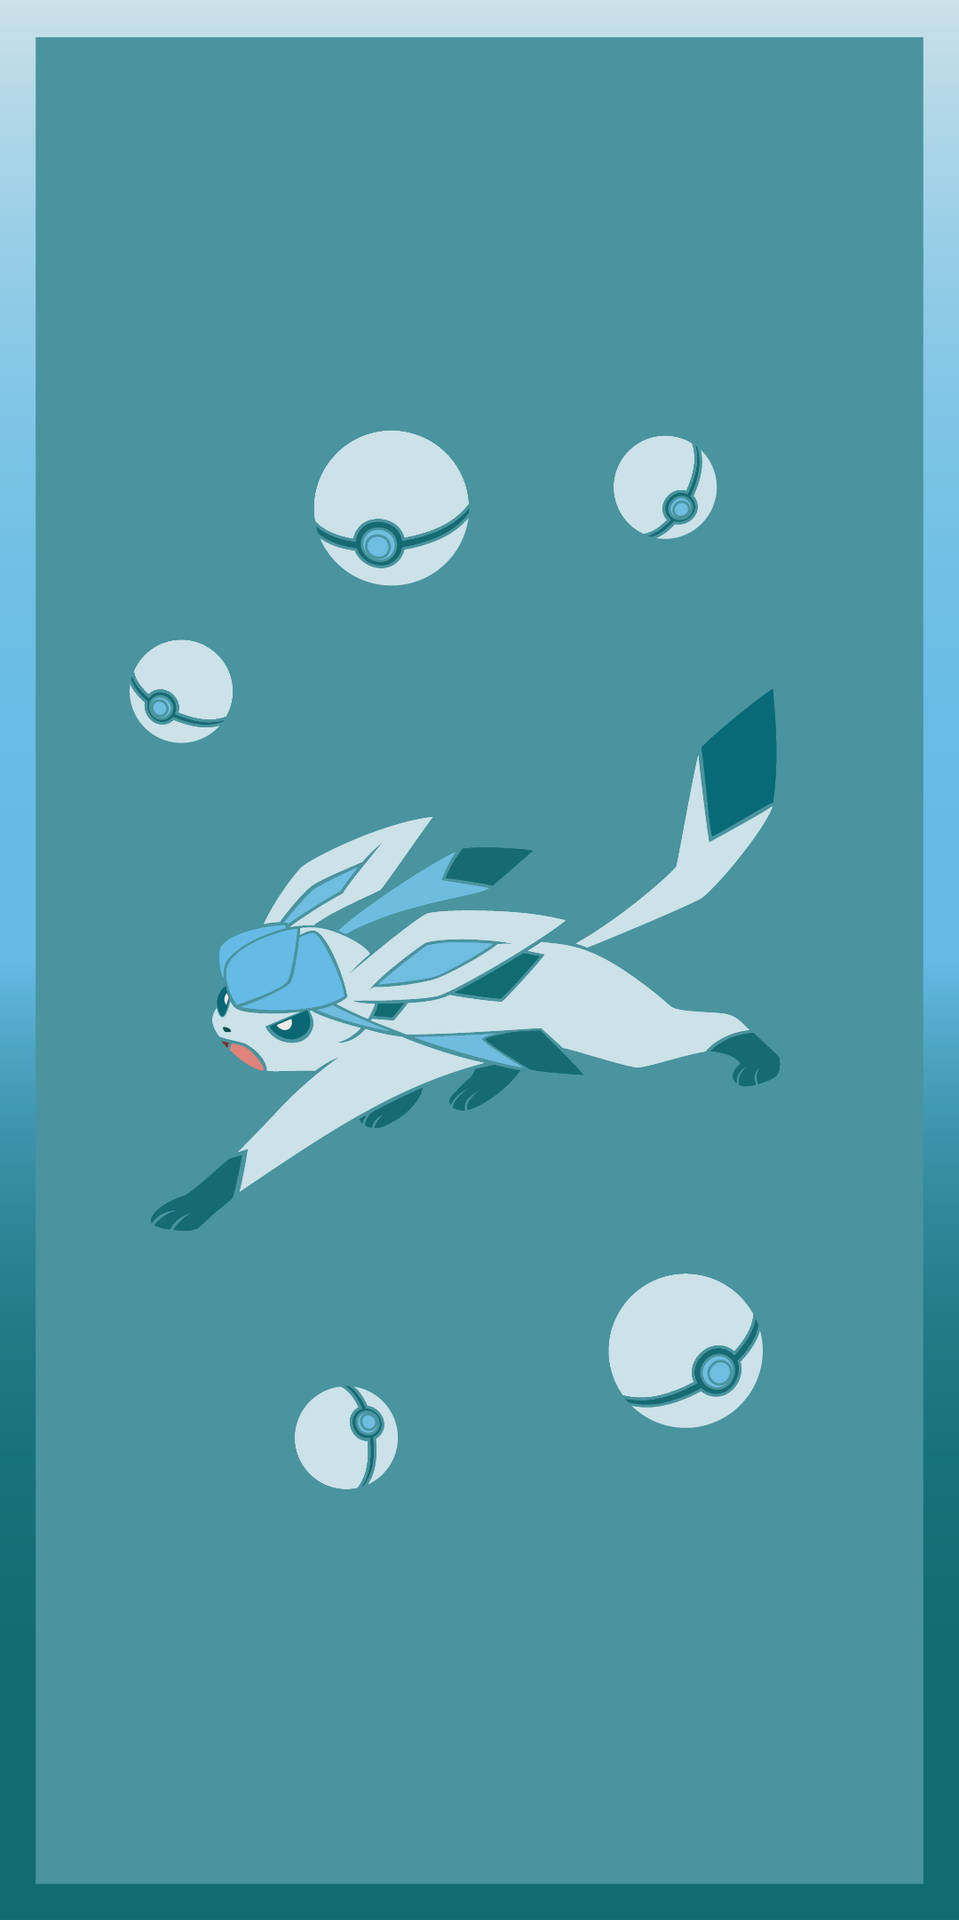 Glaceon, the fairy-type Pokémon, stands in defiance of her opponents. Wallpaper